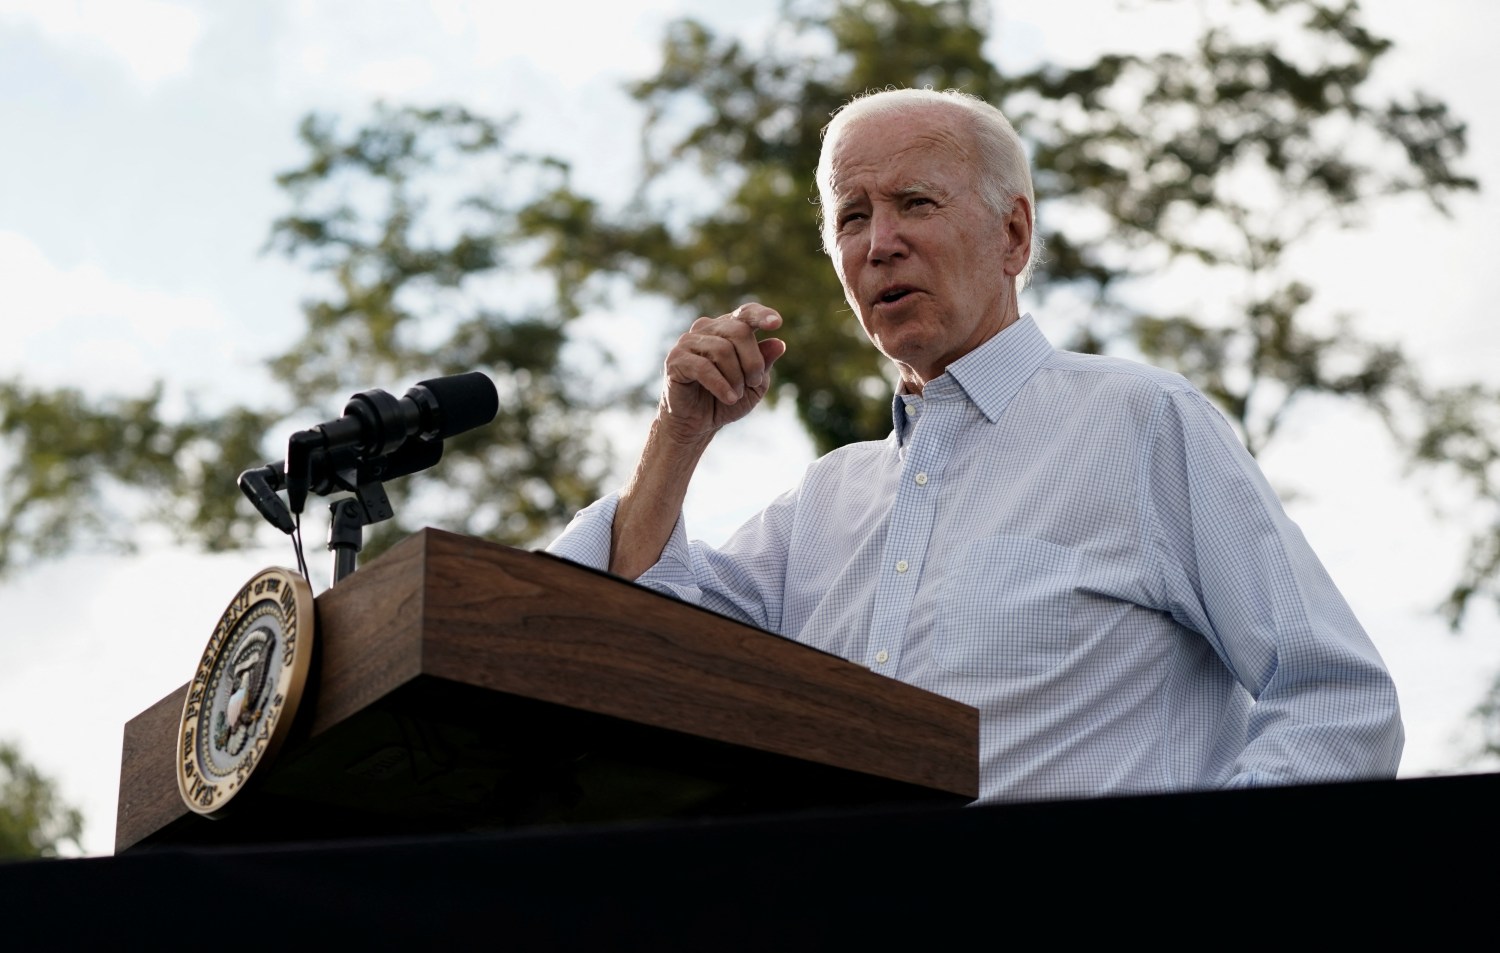 U.S. President Joe Biden delivers remarks as he attends a Labor Day celebration at the United Steelworkers of America Local Union 2227 in West Mifflin, Pennsylvania, U.S., September 5, 2022. REUTERS/Elizabeth Frantz